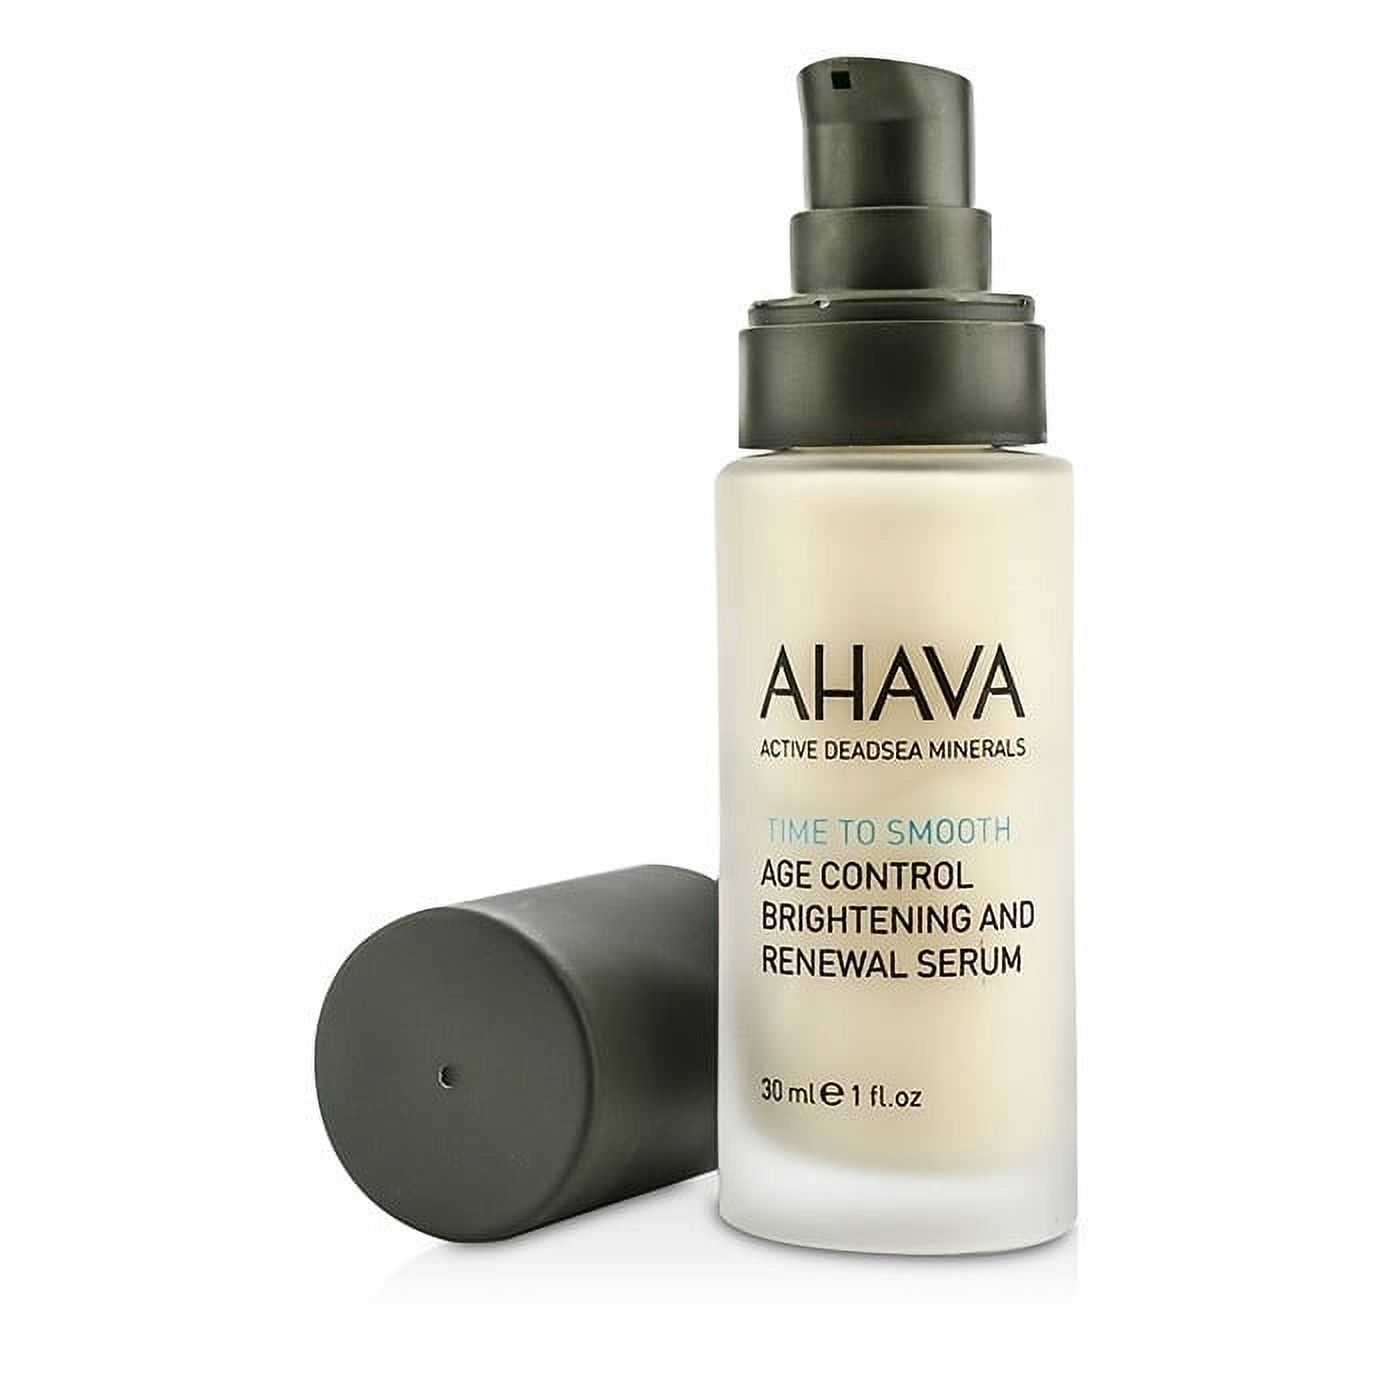 Ahava - Time To Smooth Age Control Brightening and Renewal Serum(30ml/1oz) - image 2 of 4